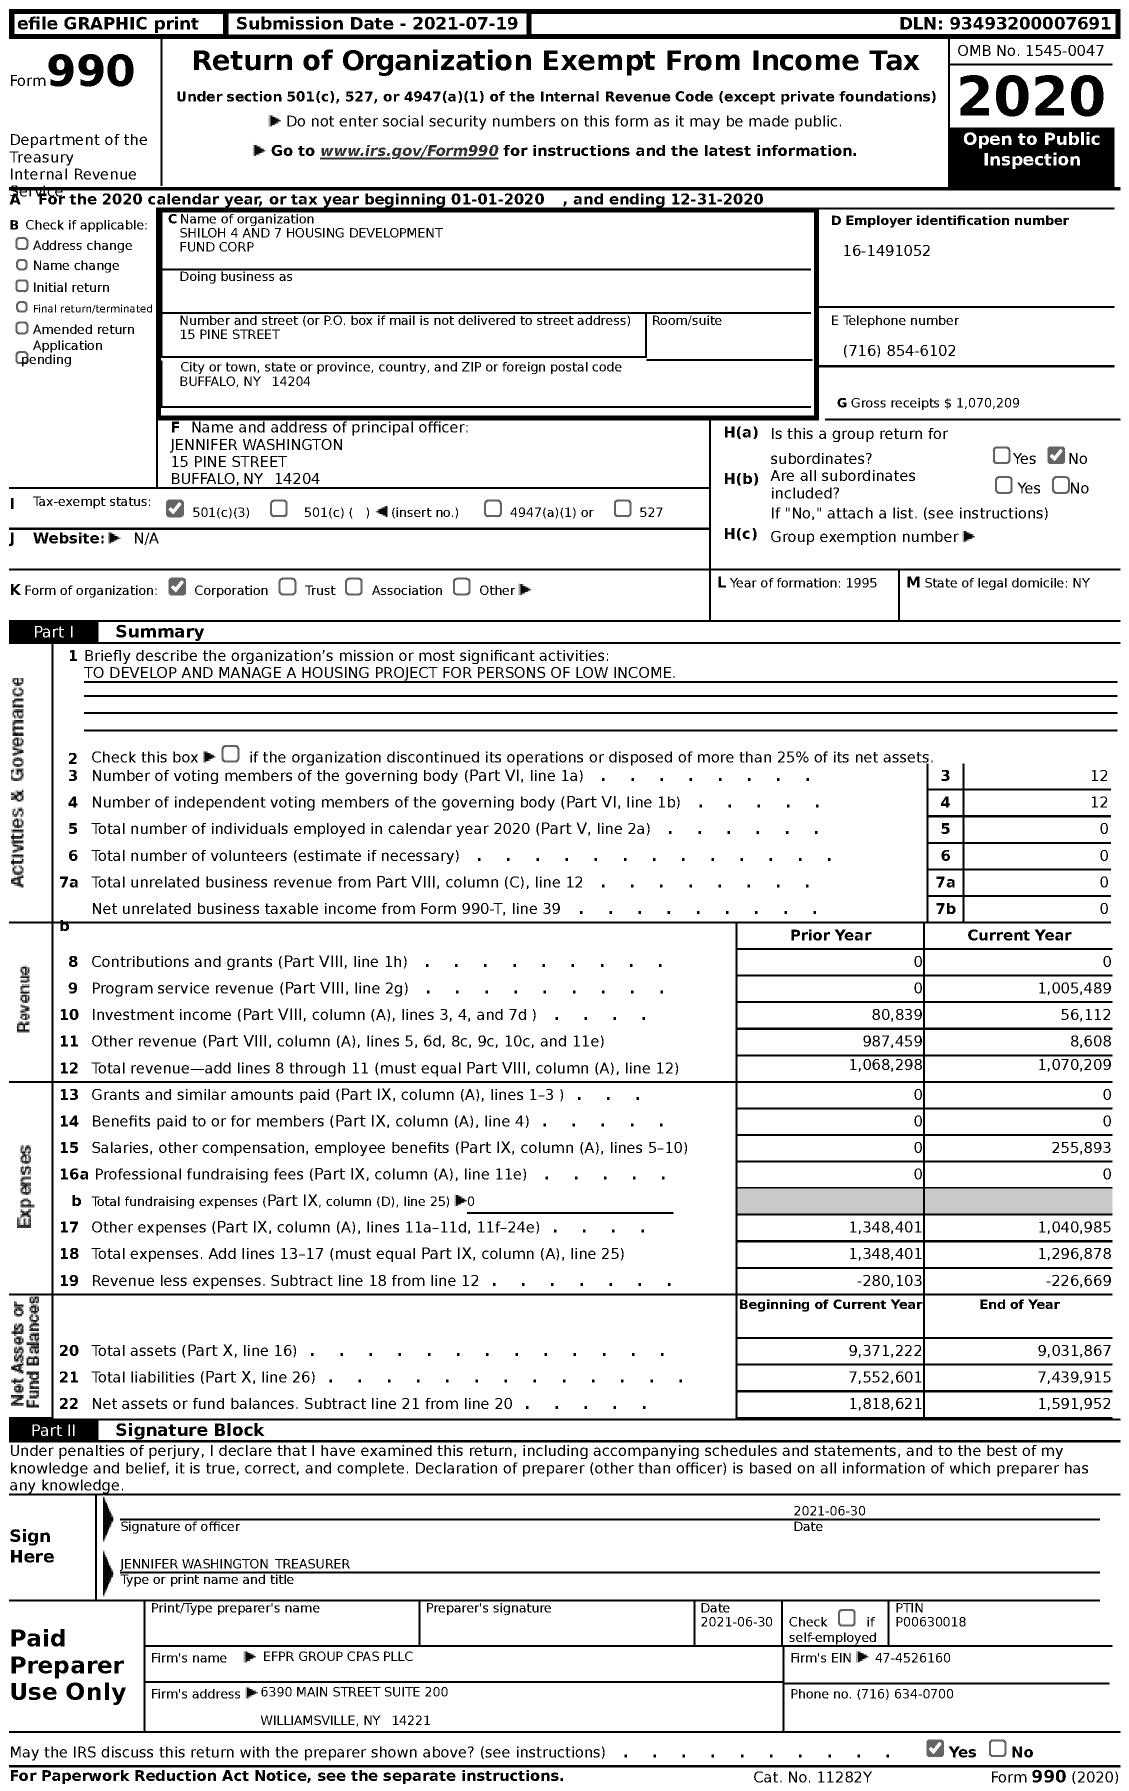 Image of first page of 2020 Form 990 for Shiloh 4 and 7 Housing Development Fund Corporation